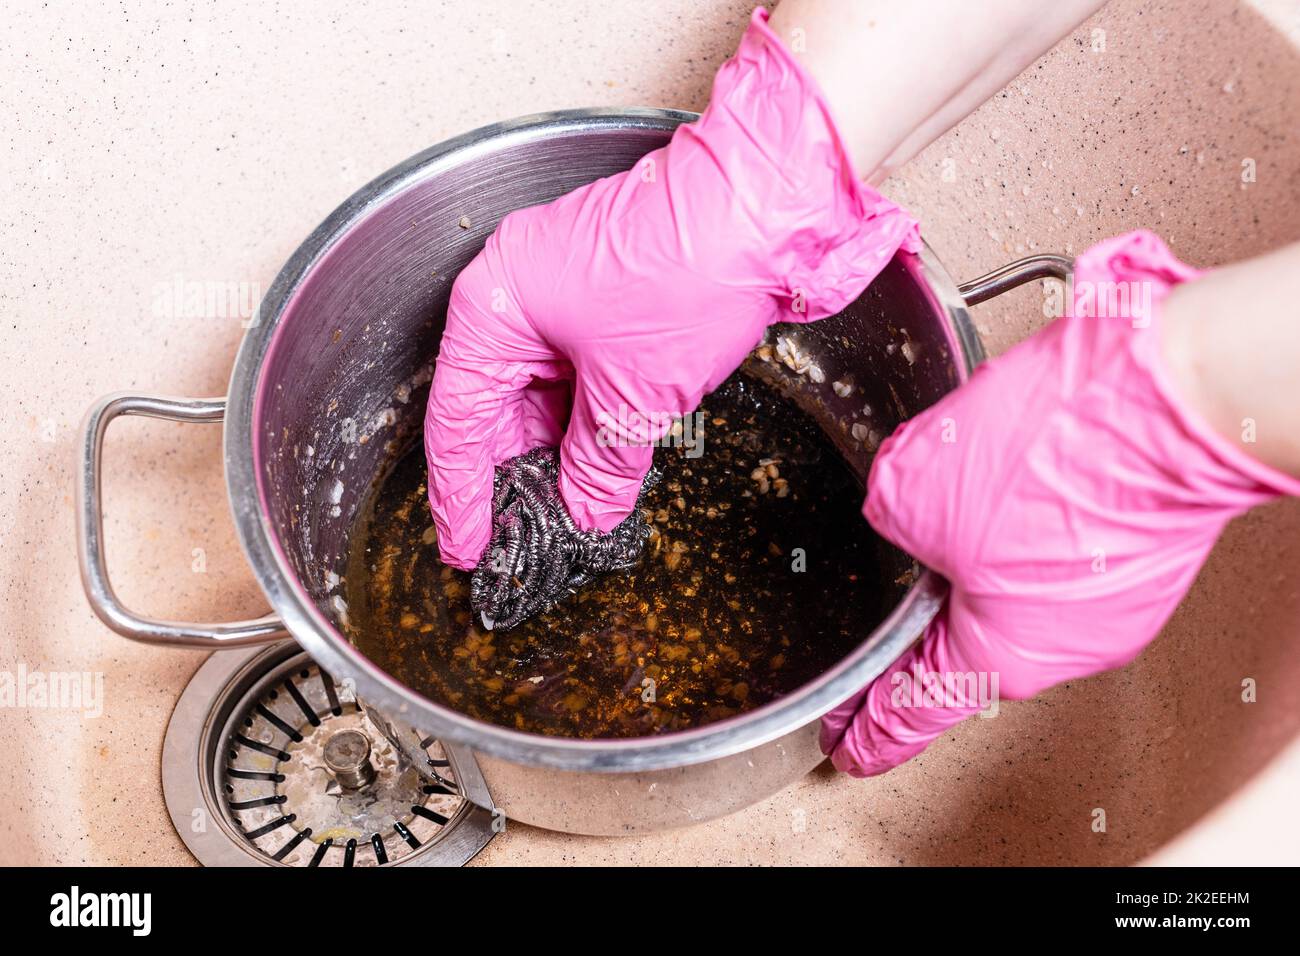 hands scrub stewpan with burnt food by sponge Stock Photo